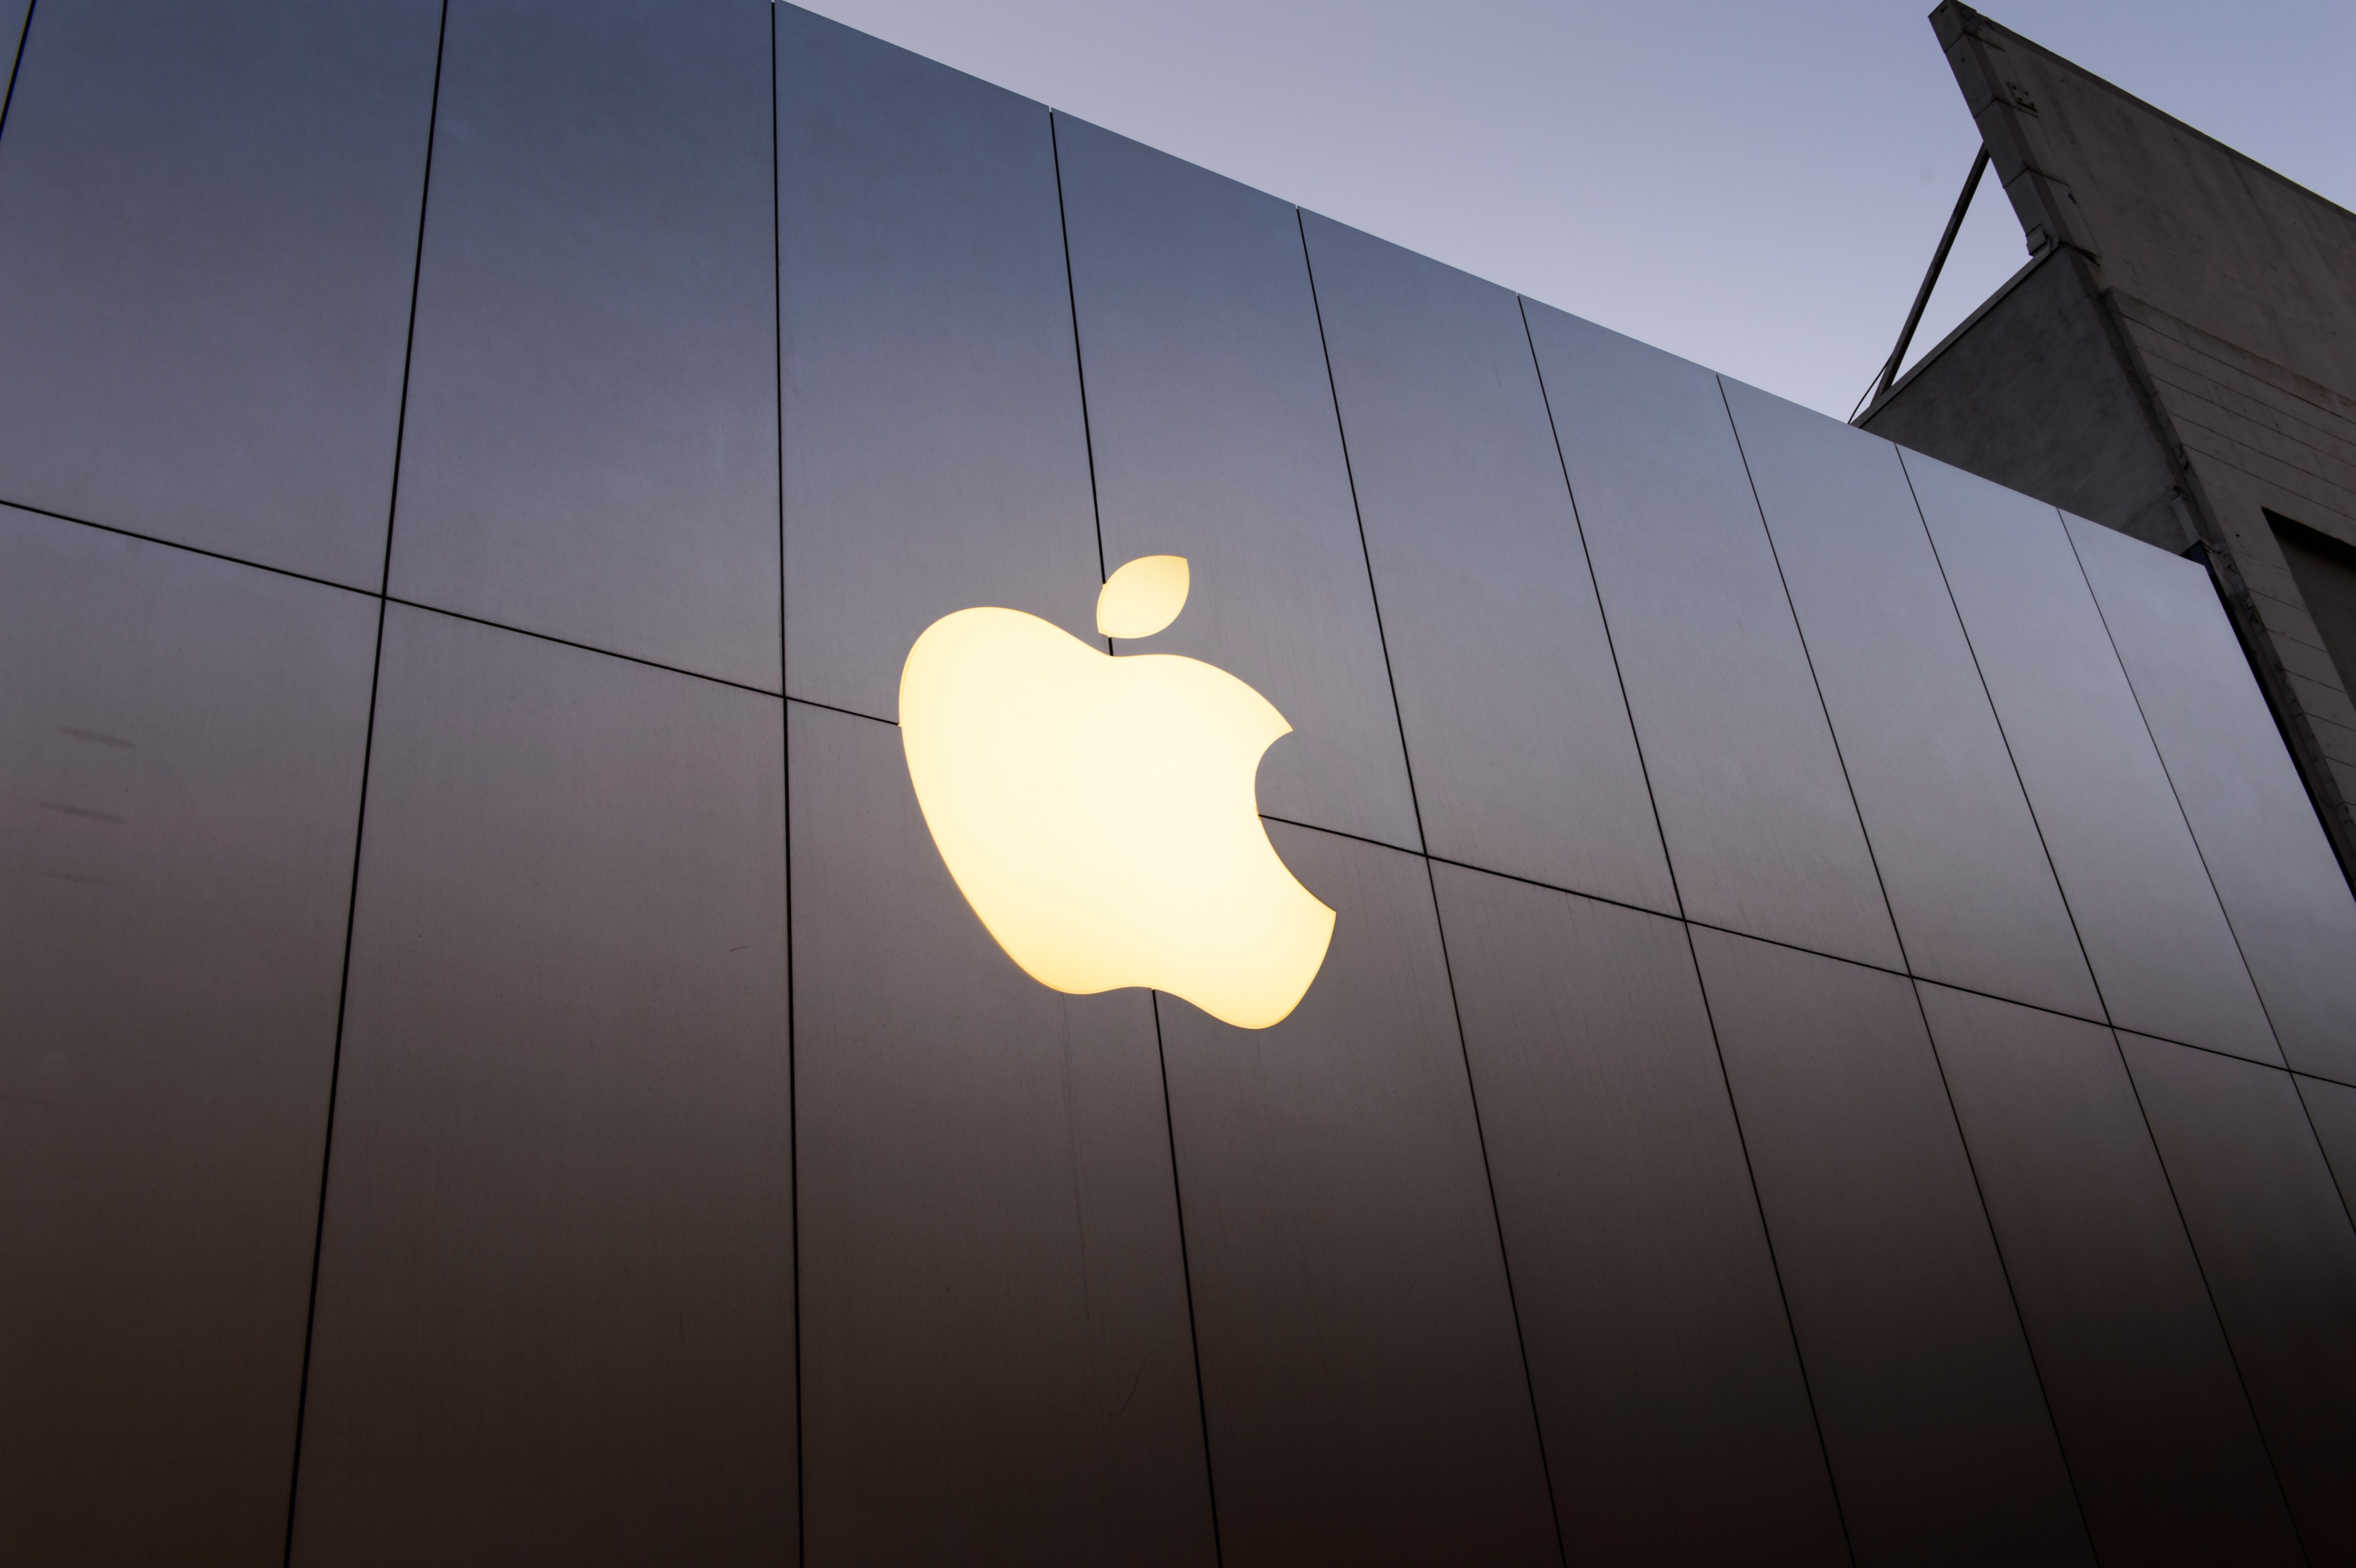 Apple Stock Readies For Pullback: What To Watch From The Market Leader